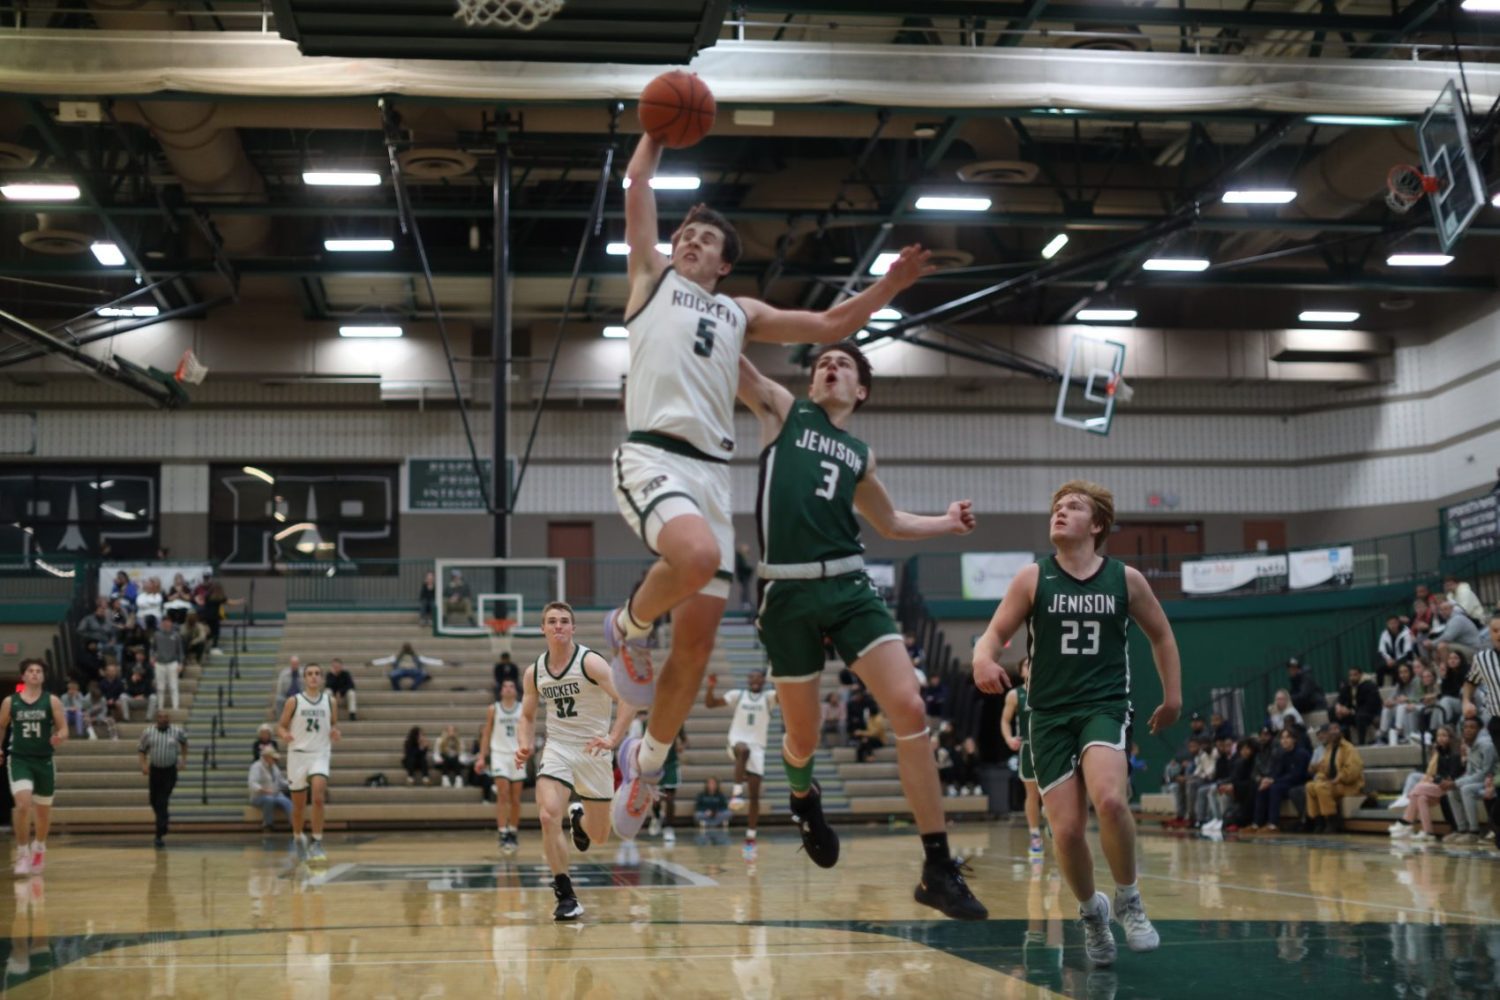 Whitaker, Ambrose lead Reeths-Puffer past Jension